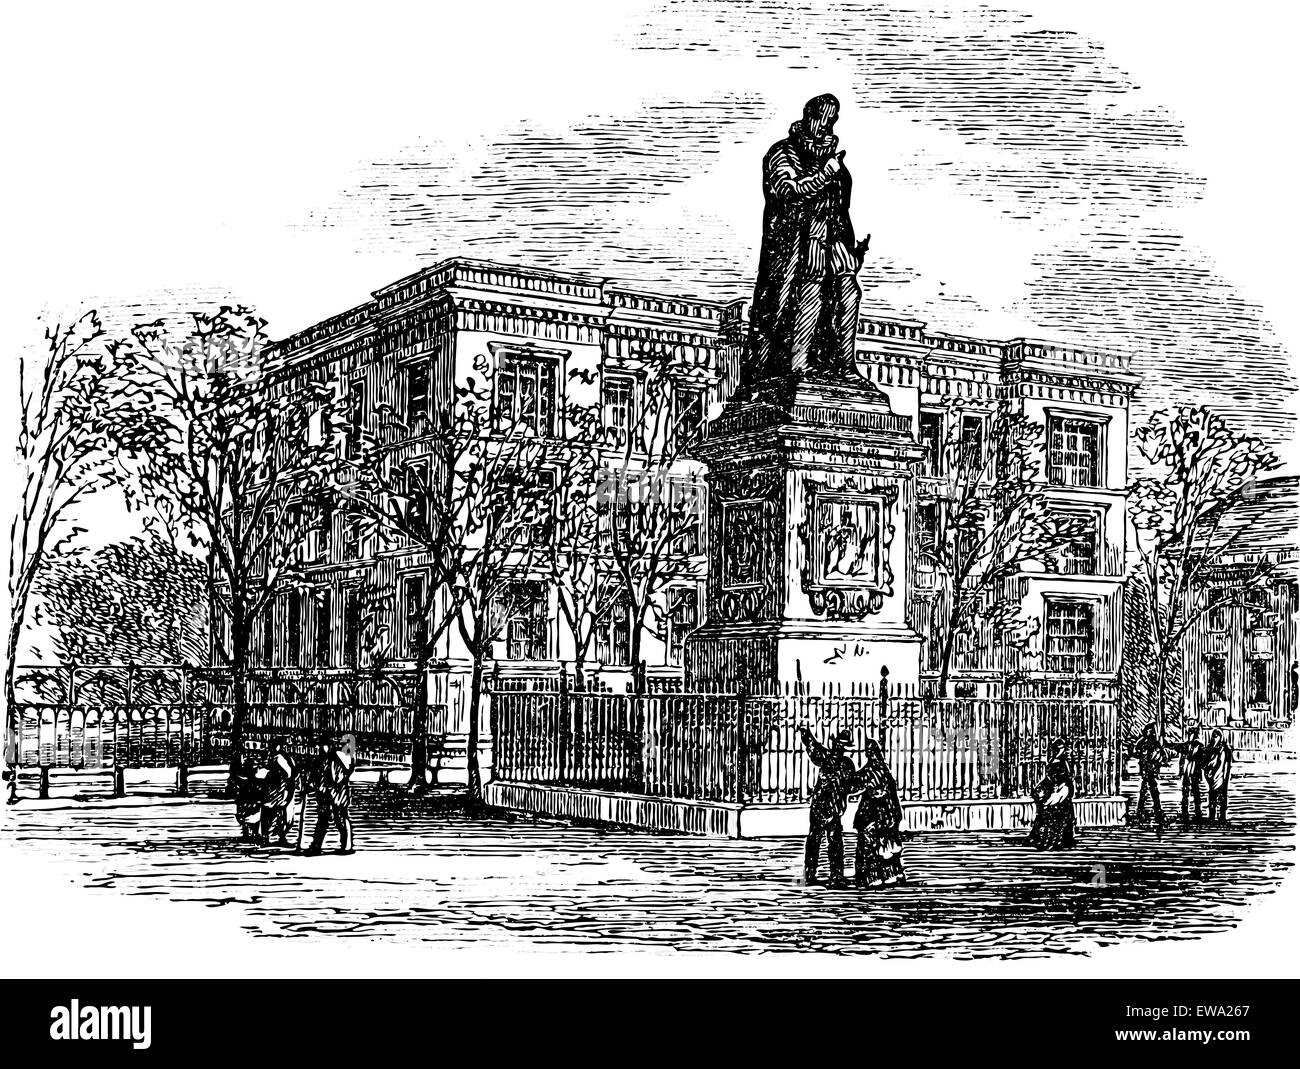 Statue of William I or Prince of Orange or William the Silent or William of Orange at The hague vintage engraving. Old engraved illustration of William the Silent's statue at Hague, Netherlands, during the 1980s. Stock Vector